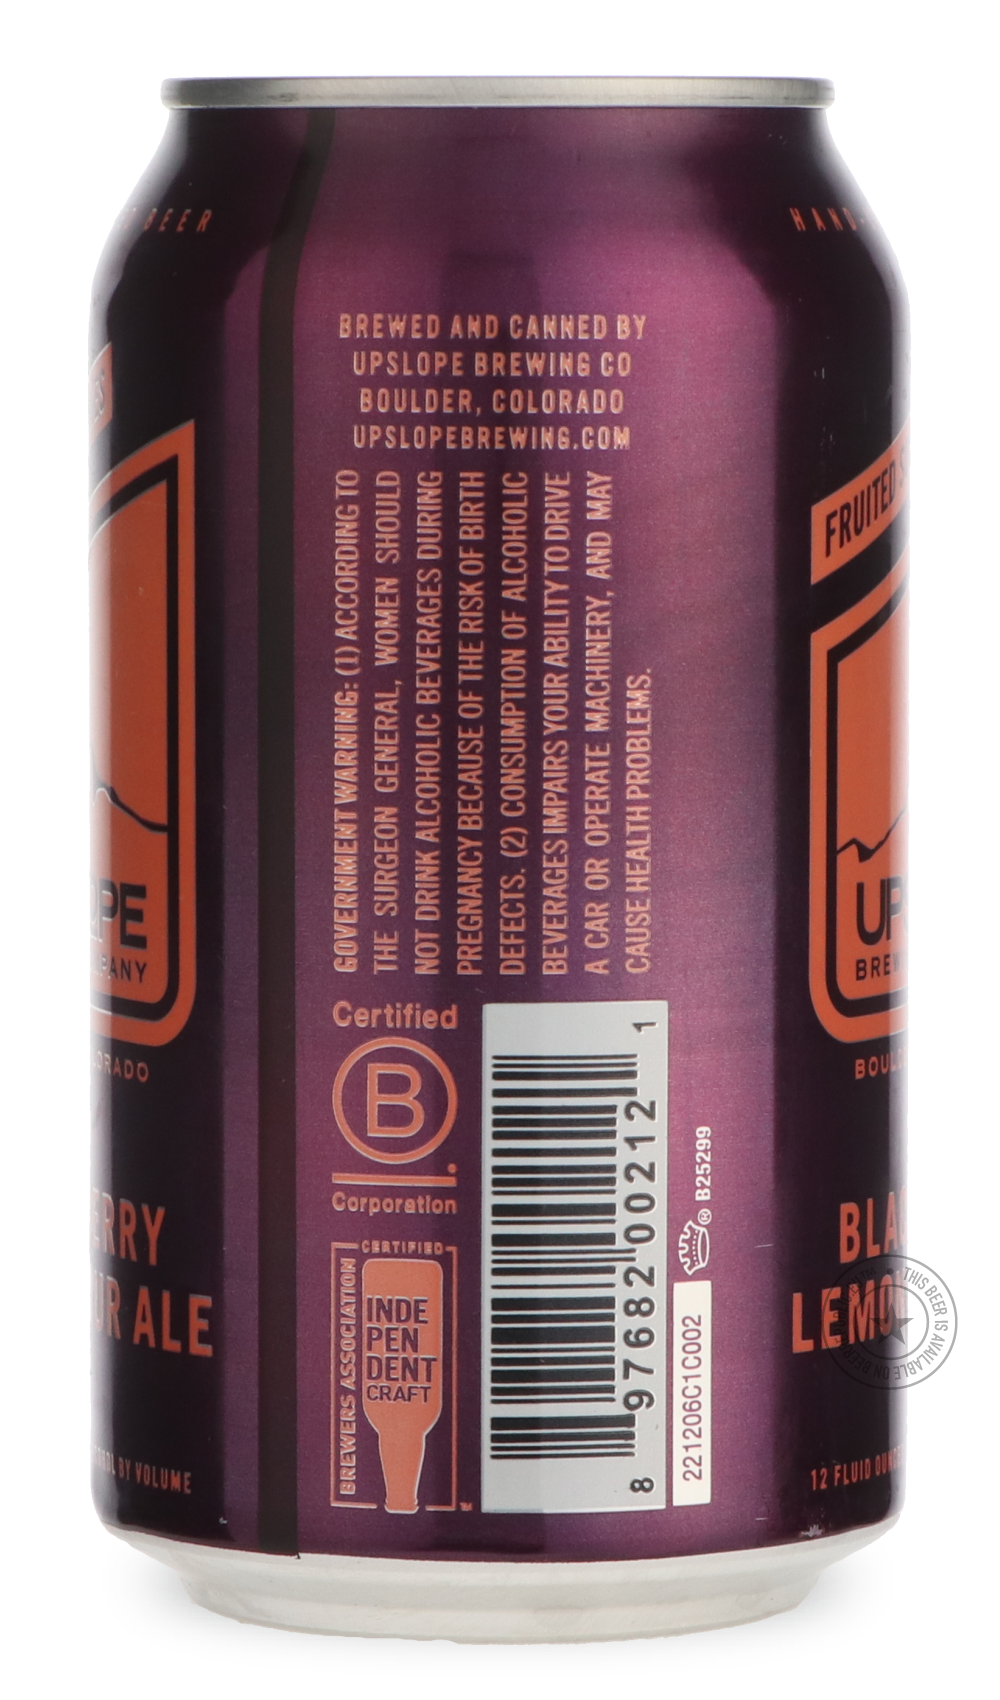 -Upslope- Blackberry Lemon Sour-Sour / Wild & Fruity- Only @ Beer Republic - The best online beer store for American & Canadian craft beer - Buy beer online from the USA and Canada - Bier online kopen - Amerikaans bier kopen - Craft beer store - Craft beer kopen - Amerikanisch bier kaufen - Bier online kaufen - Acheter biere online - IPA - Stout - Porter - New England IPA - Hazy IPA - Imperial Stout - Barrel Aged - Barrel Aged Imperial Stout - Brown - Dark beer - Blond - Blonde - Pilsner - Lager - Wheat - W